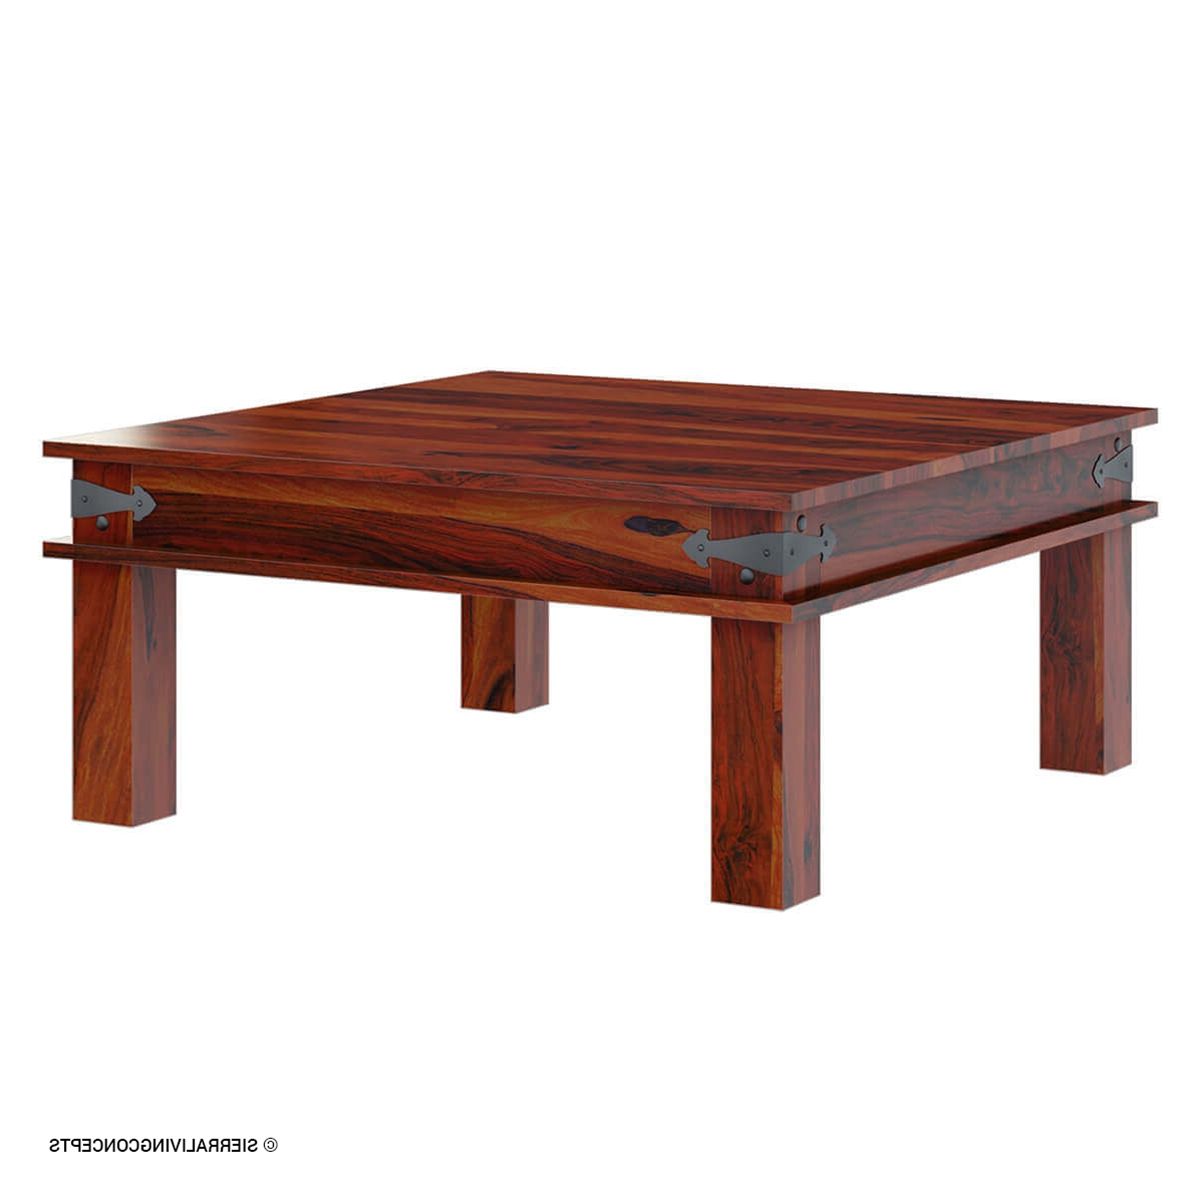 Favorite Altamont Transitional Solid Wood Square Coffee Table Intended For Transitional Square Coffee Tables (View 2 of 15)